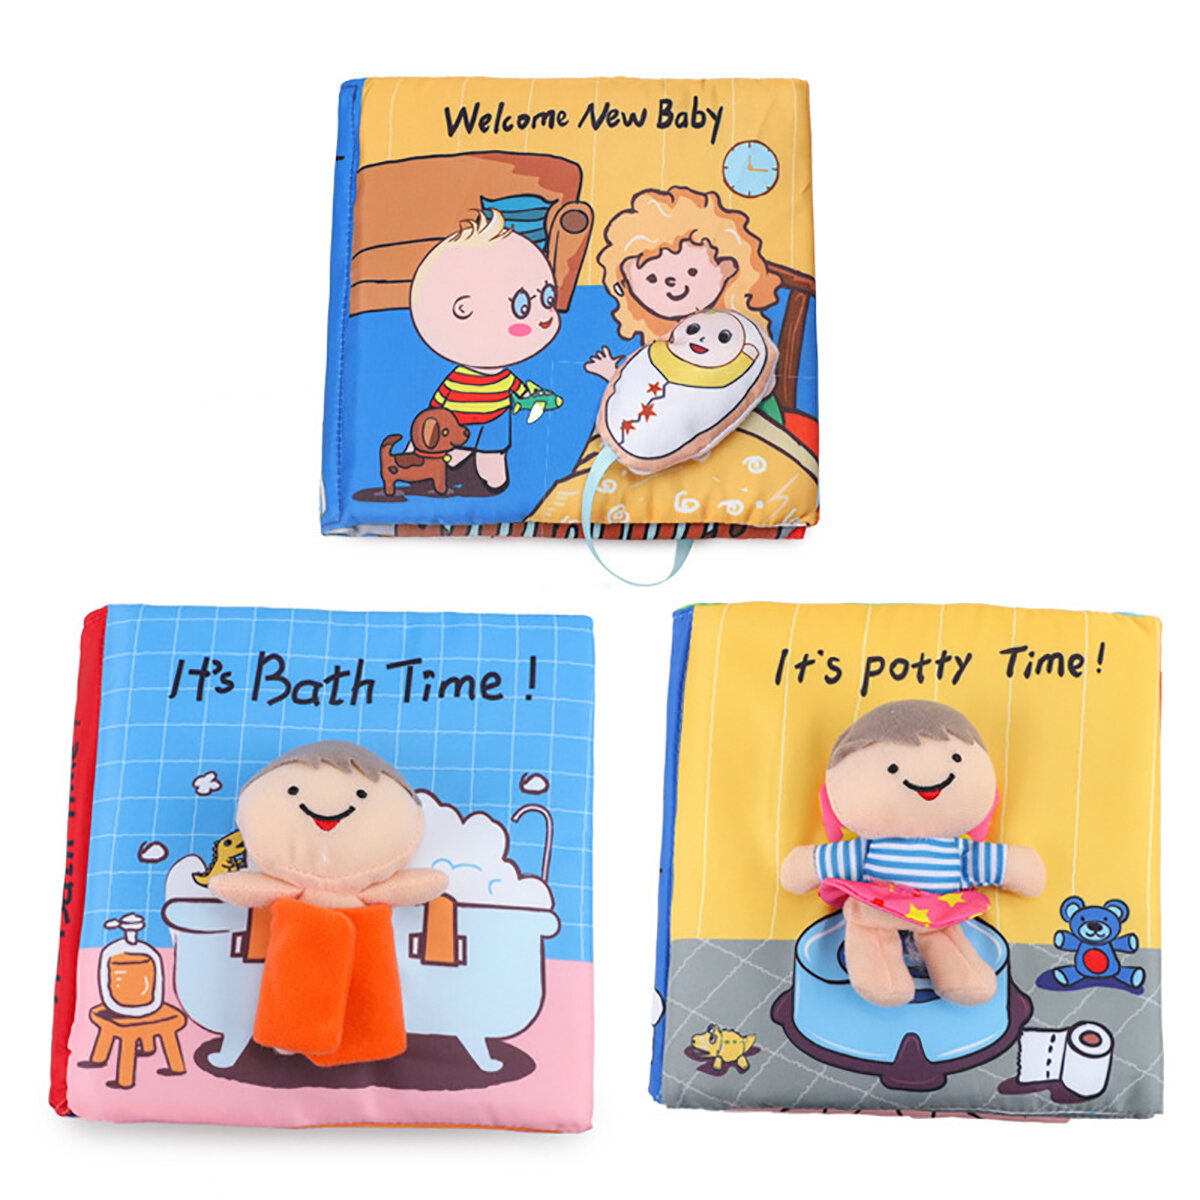 Tear-resistant Cloth Books for Baby Soft Nontoxic Fabric Early Children's Development Books Toys Gif